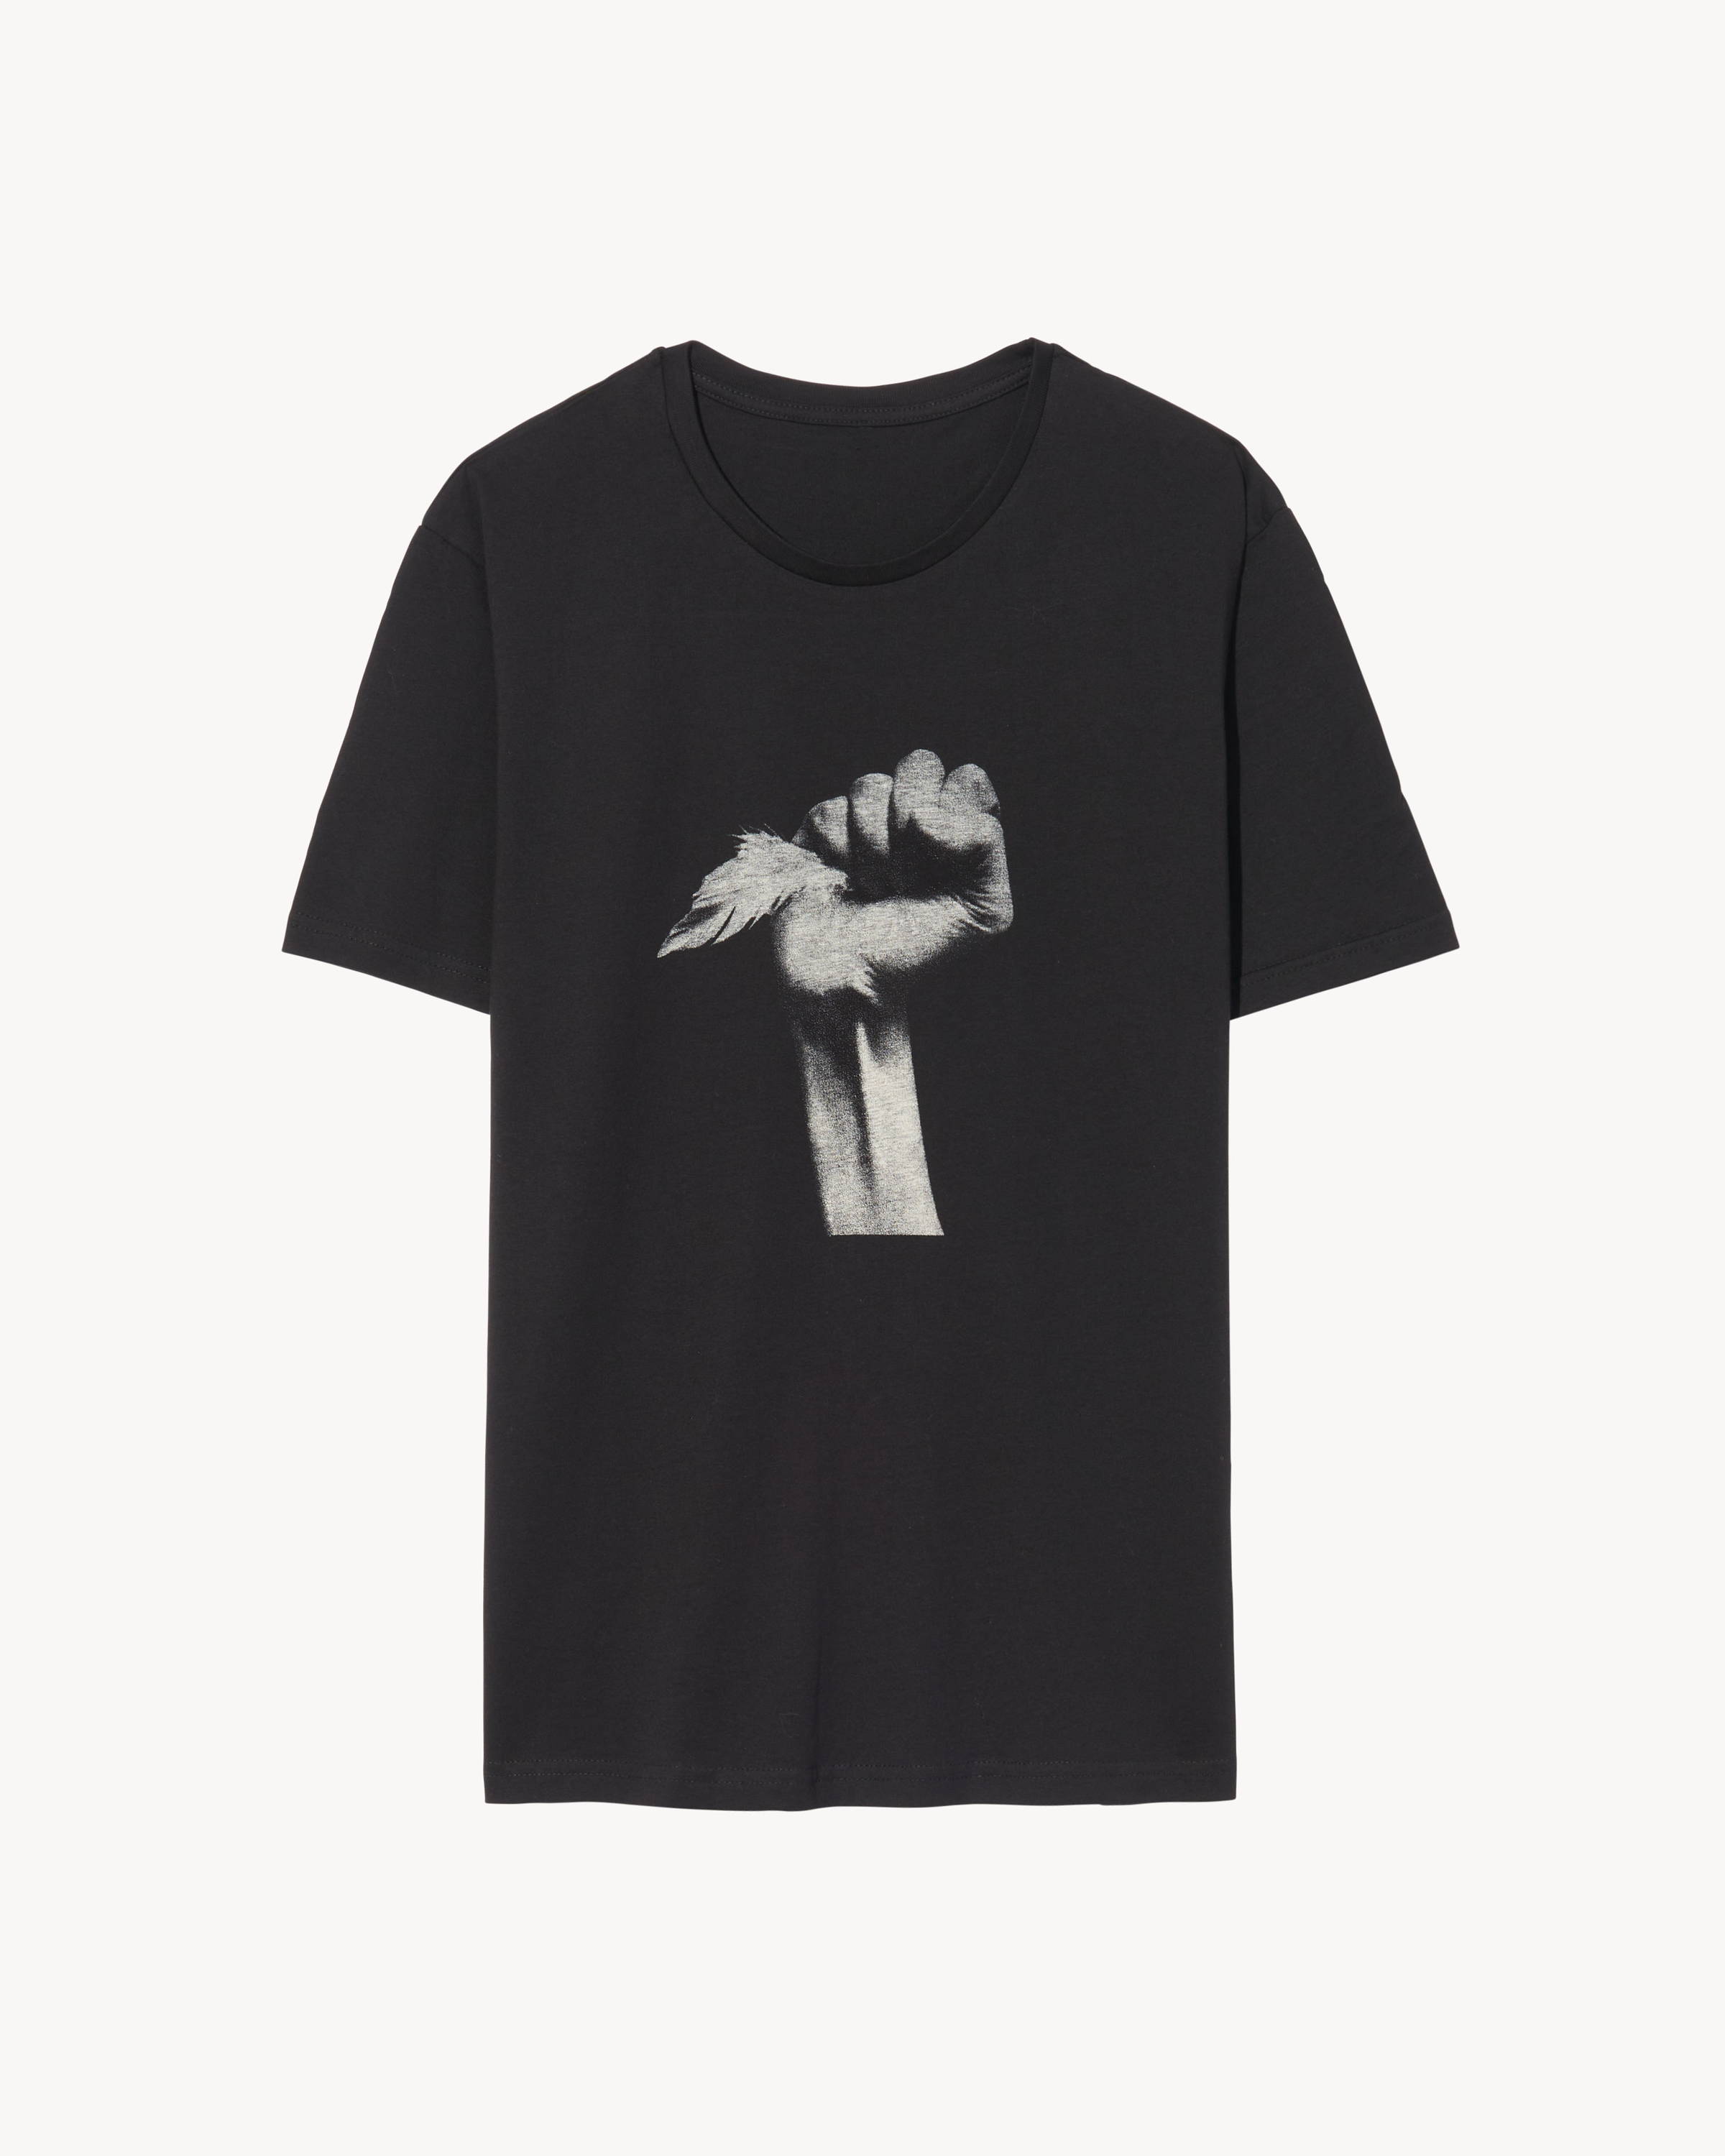 A black tee with a black and white image of a hand holding a feather.